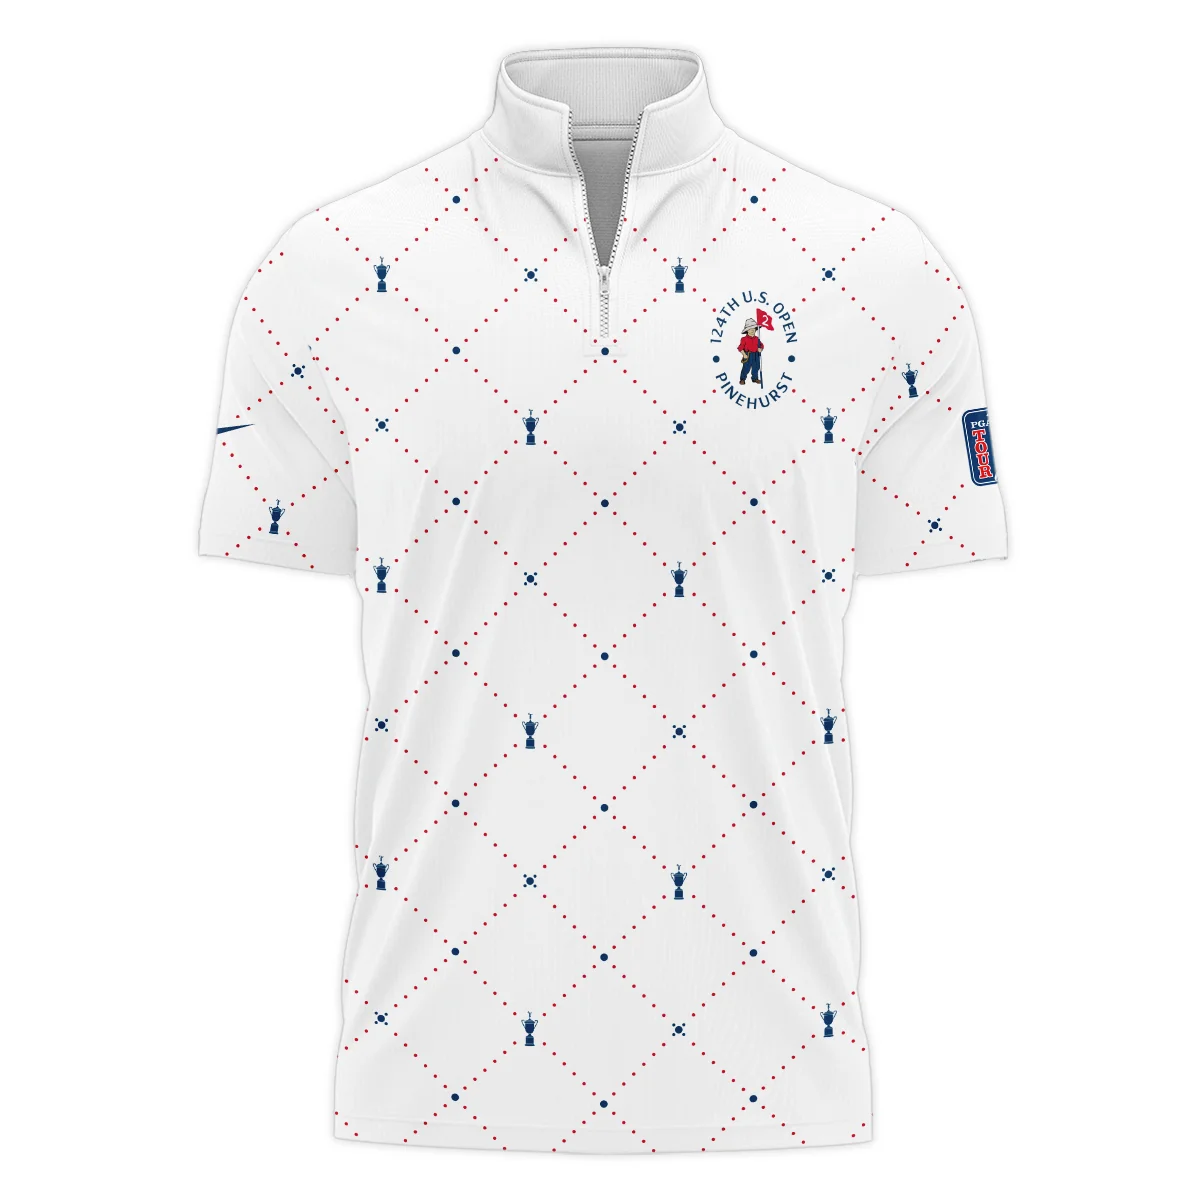 Argyle Pattern With Cup 124th U.S. Open Pinehurst Nike Vneck Polo Shirt Style Classic Polo Shirt For Men